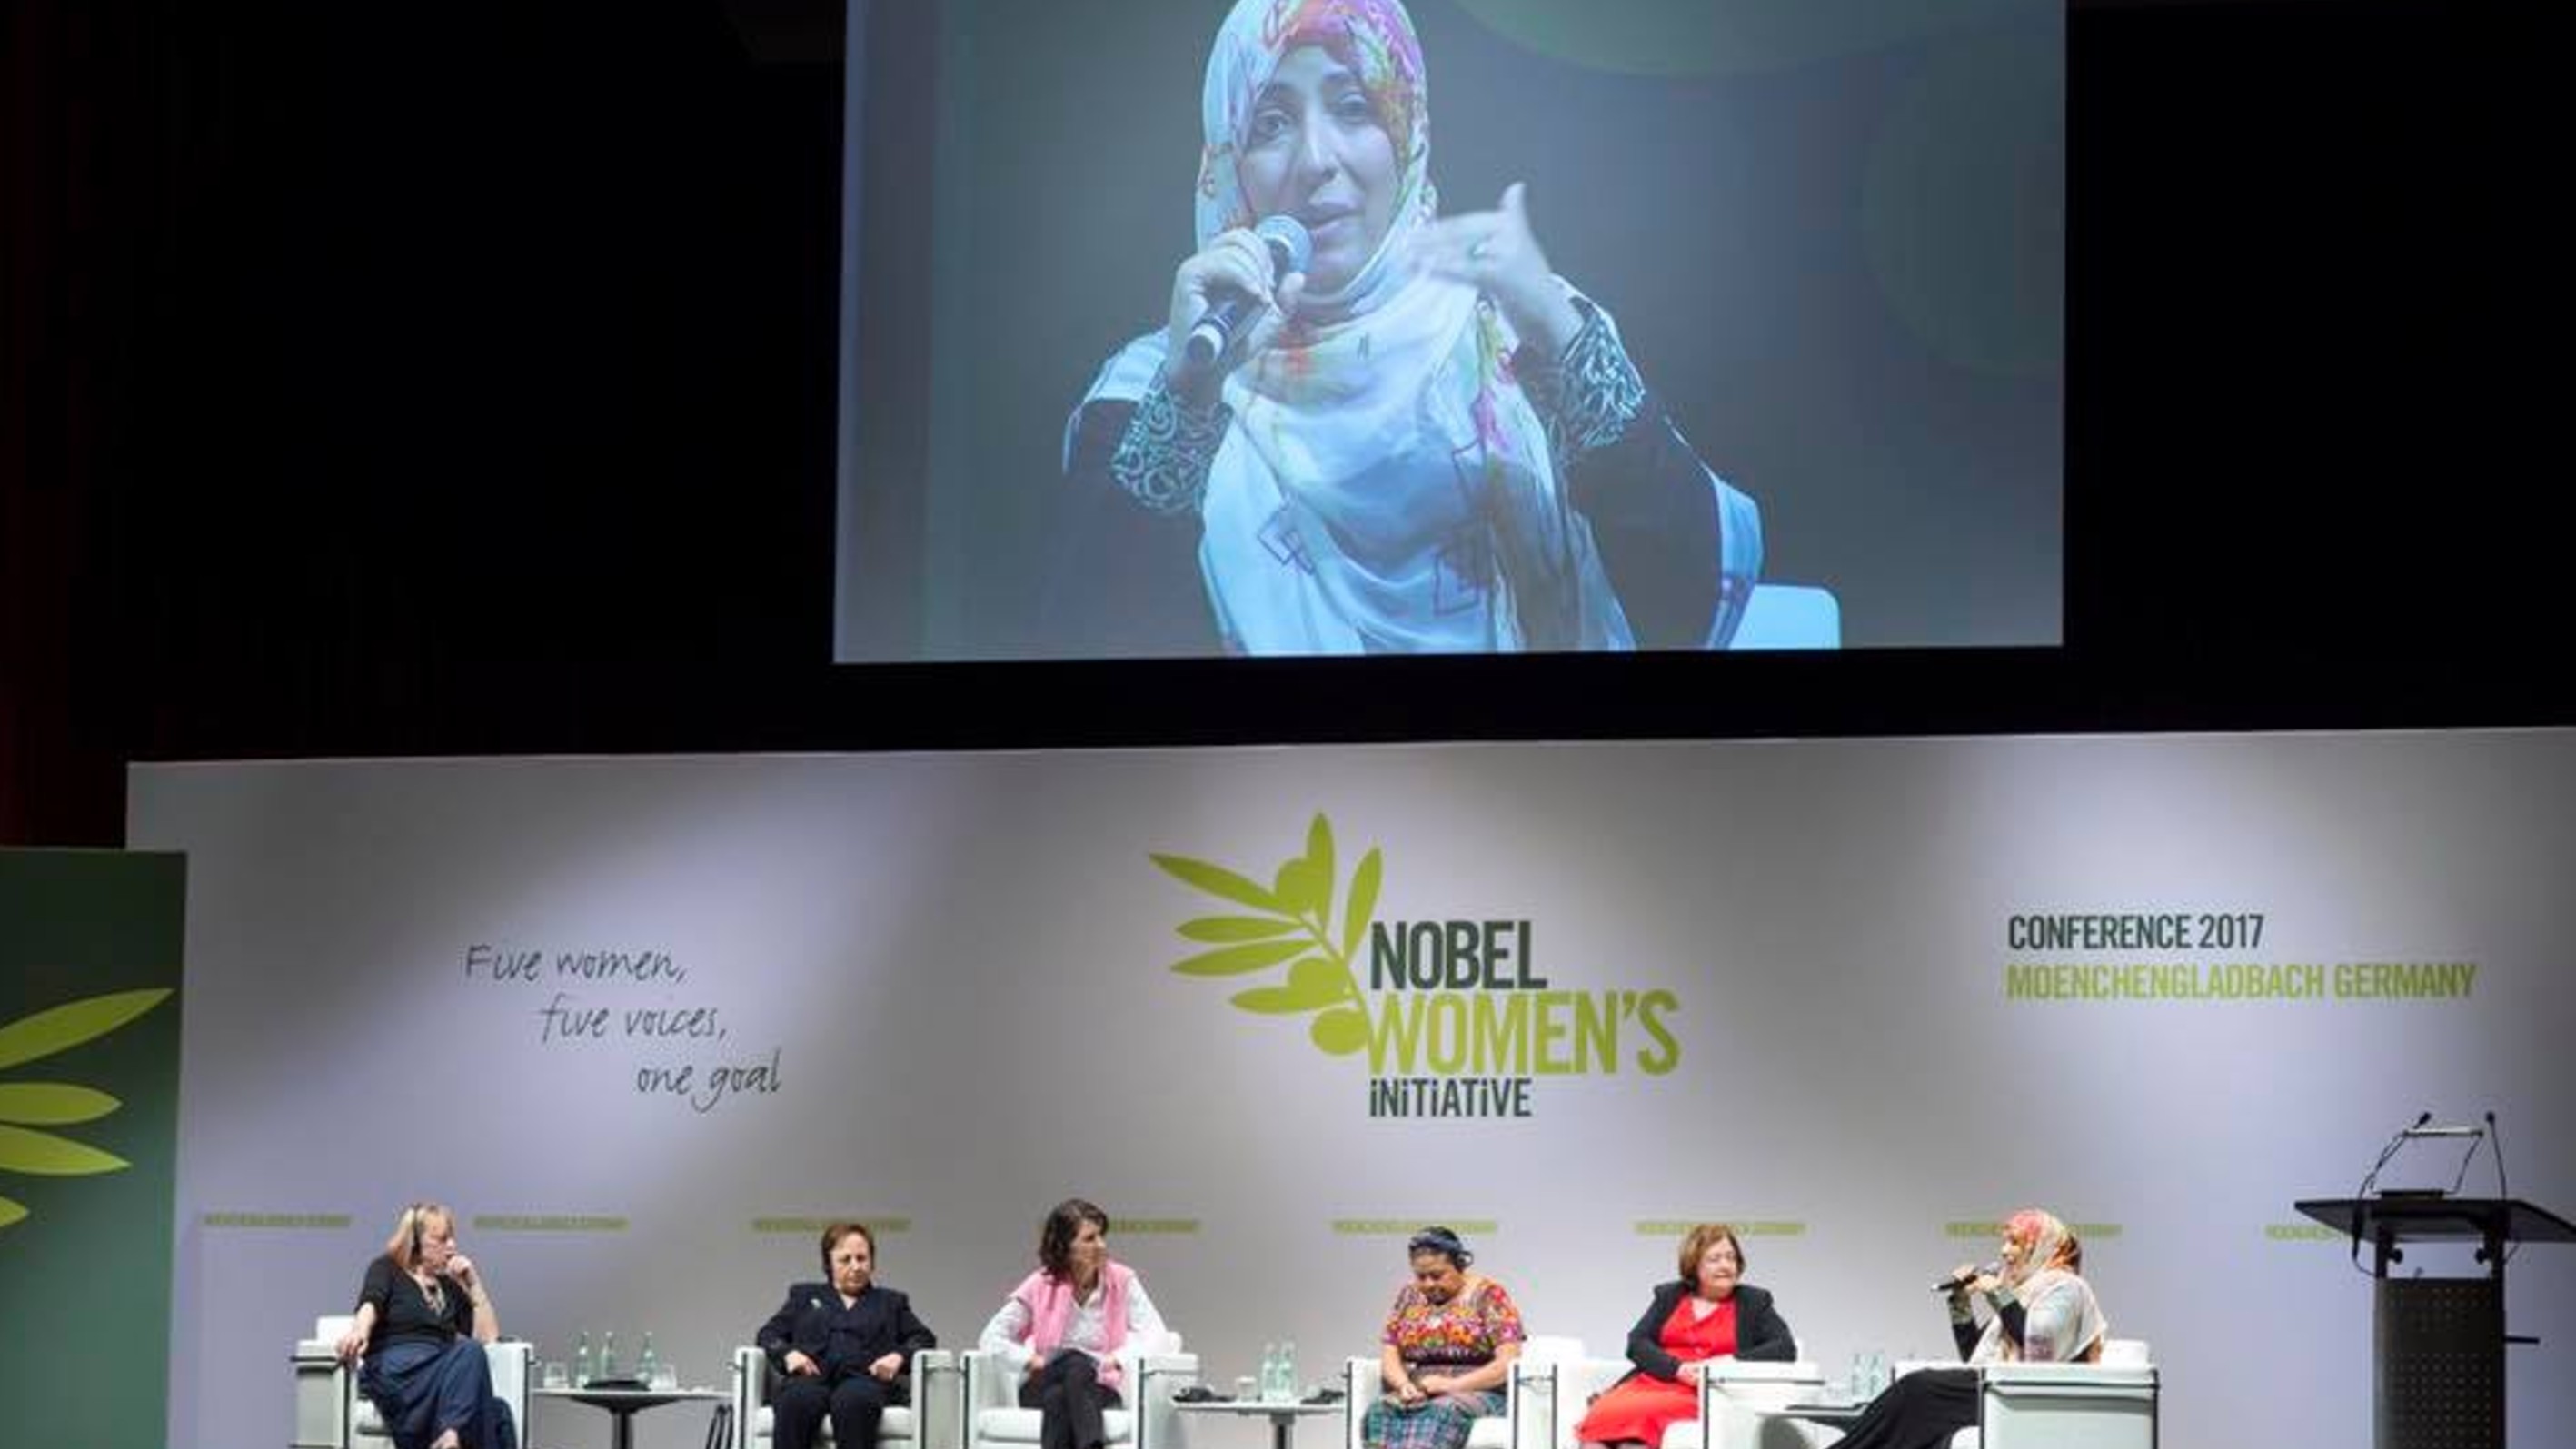 Mrs. Tawakkol Karman's speech at the opening session of Nobel Women's Initiative biannual conference in Germany